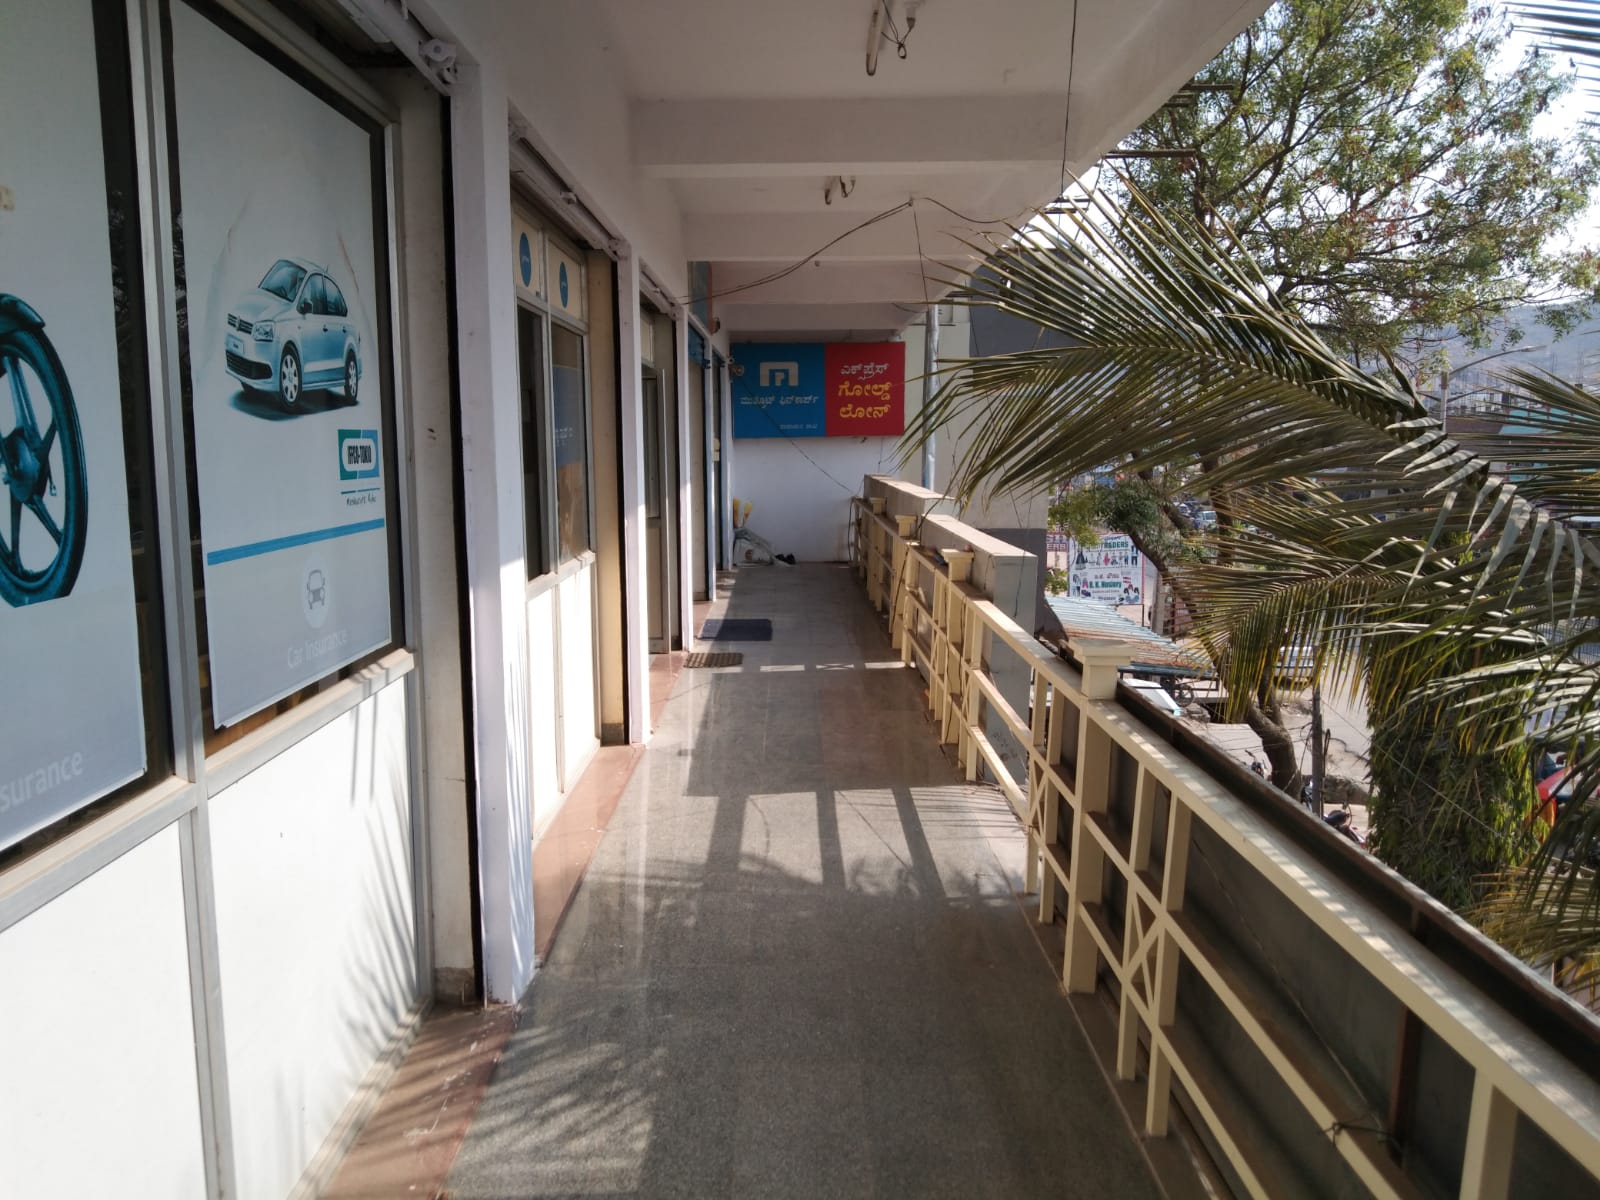 Photos and Videos of Muthoot Fincorp Gold Loan in Above ICICI Bank, Gulbarga